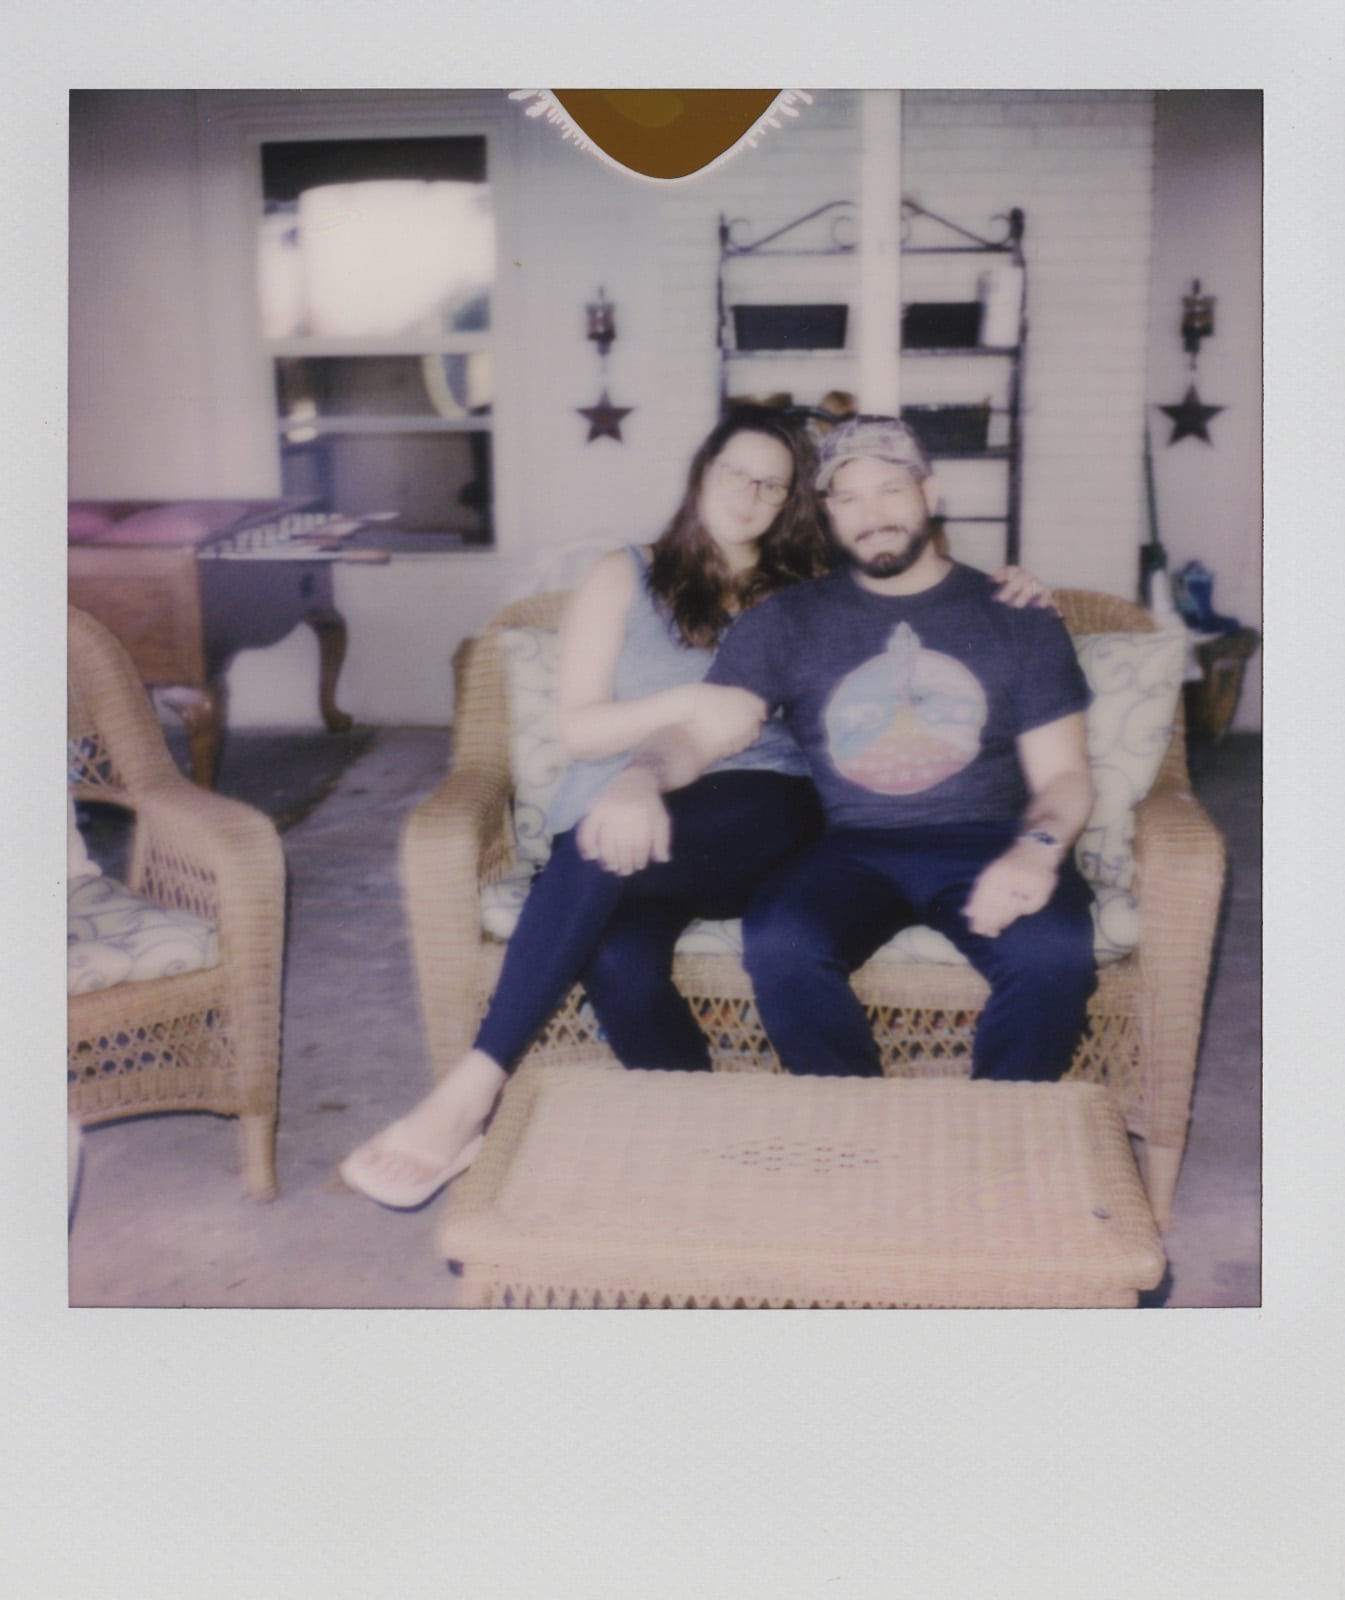 Us on our last day there Polaroid photos